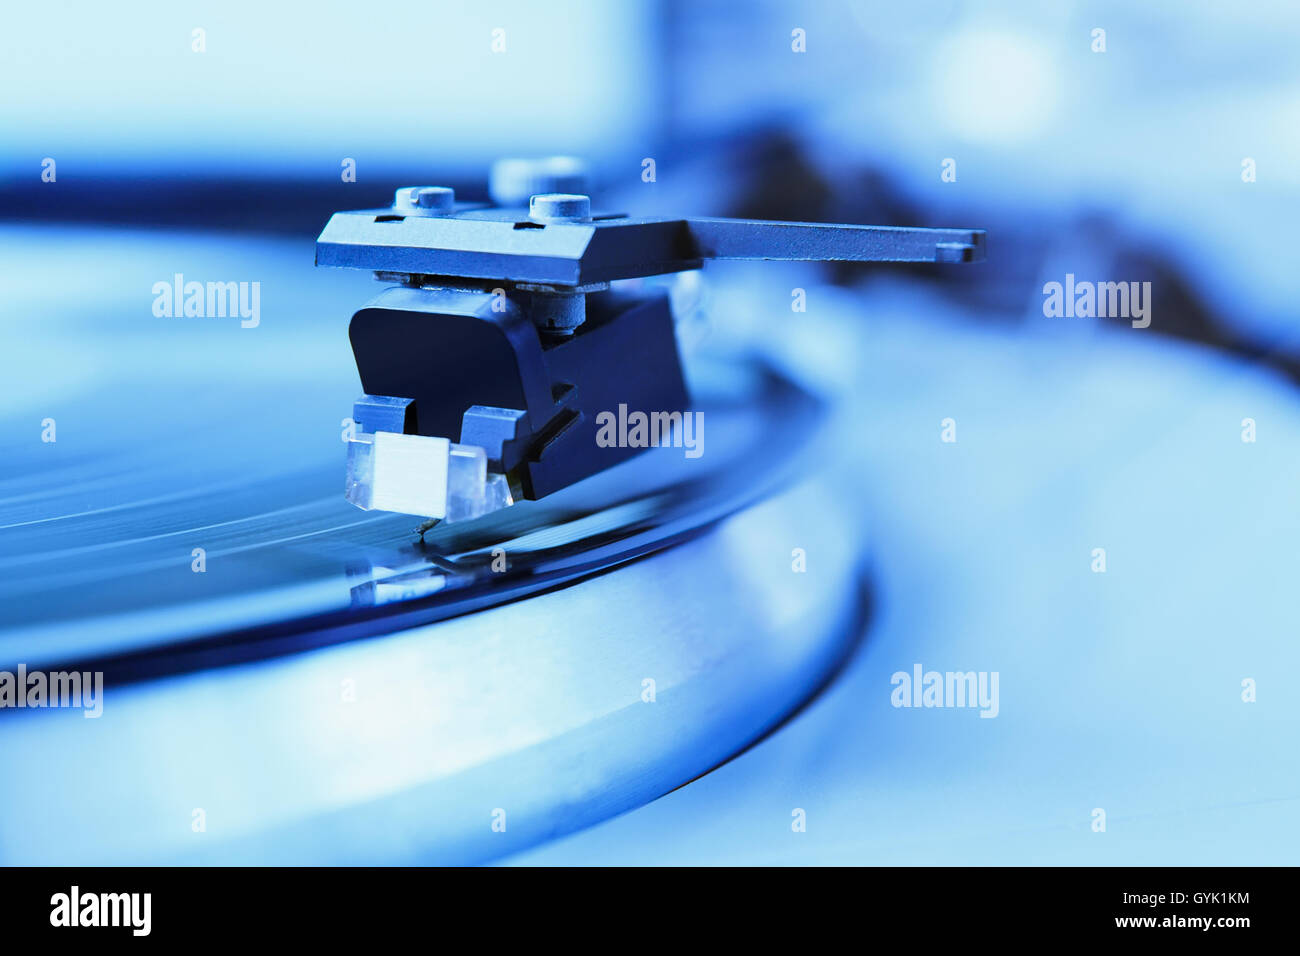 Turntable analog record player playing vinyl disc with music. Focus on the needle. Stock Photo